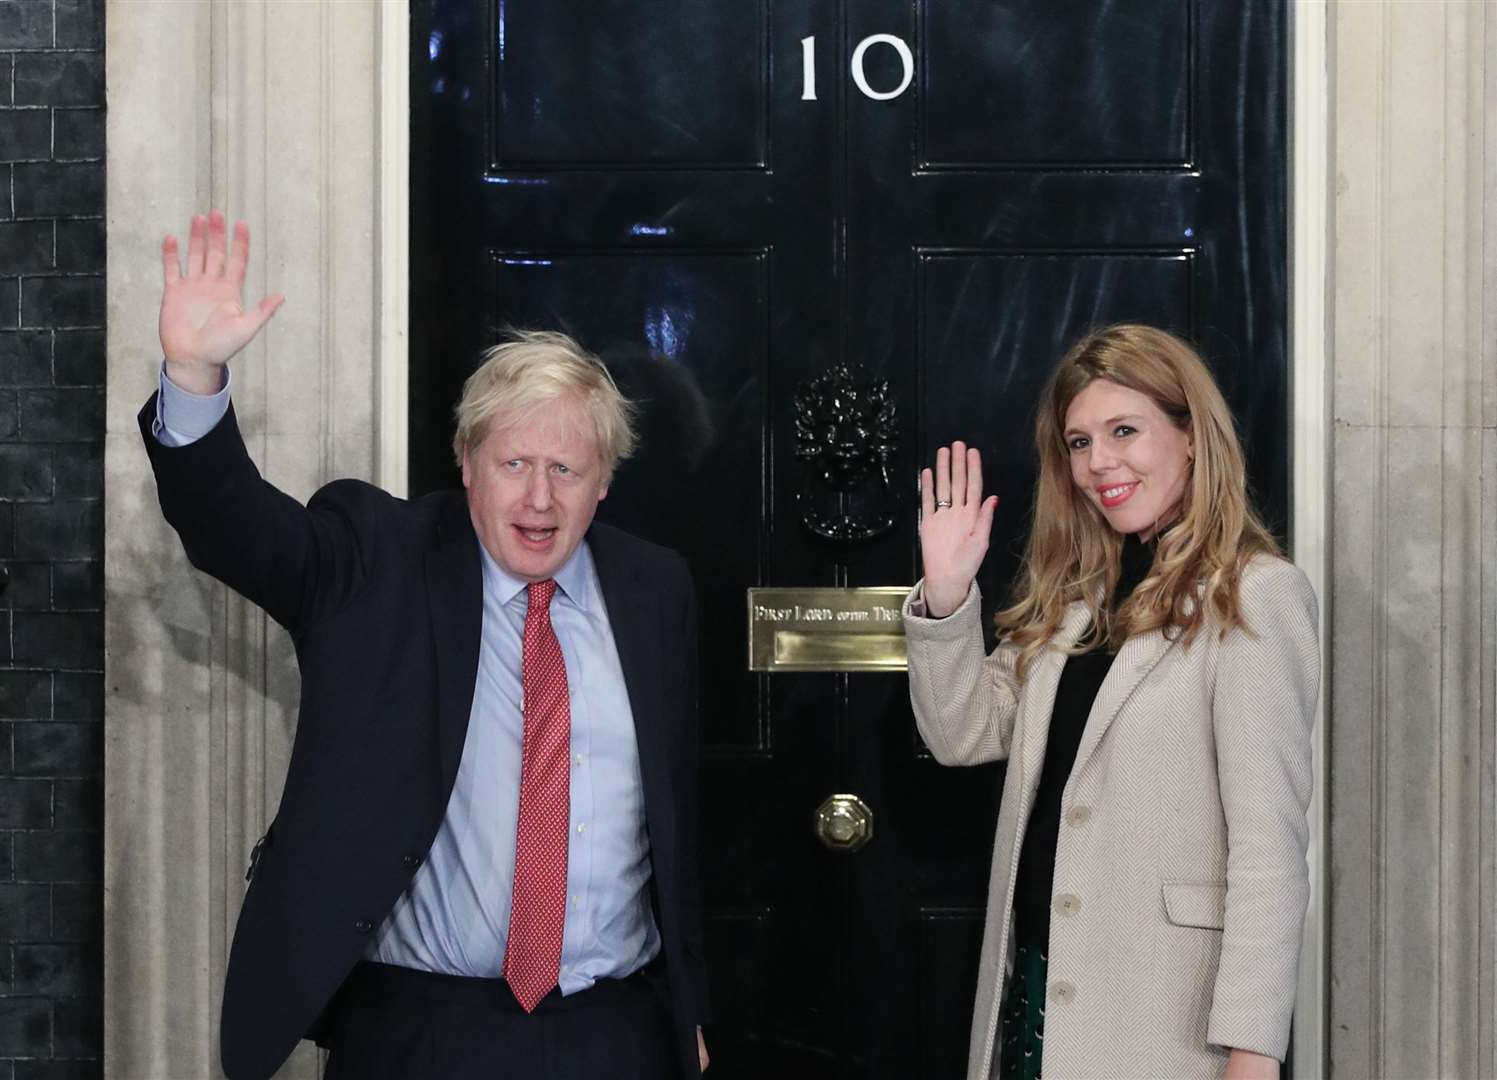 Mr Johnson and his girlfriend Carrie Symonds arrive in Downing Street after the landslide victory in the 2019 general election (Yui Mok/PA)